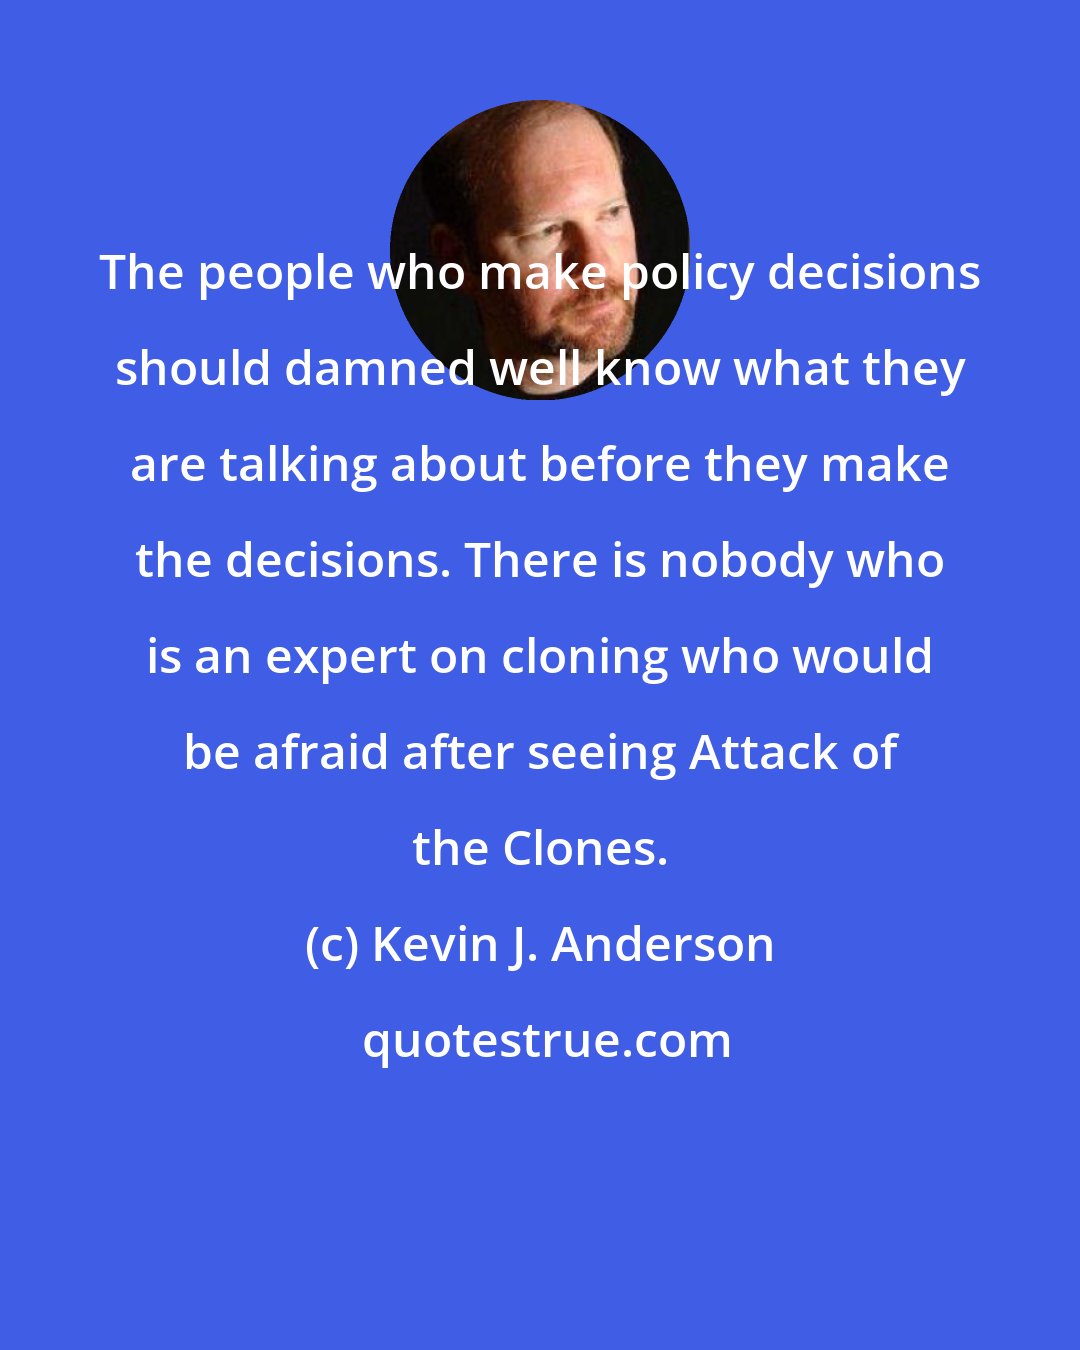 Kevin J. Anderson: The people who make policy decisions should damned well know what they are talking about before they make the decisions. There is nobody who is an expert on cloning who would be afraid after seeing Attack of the Clones.